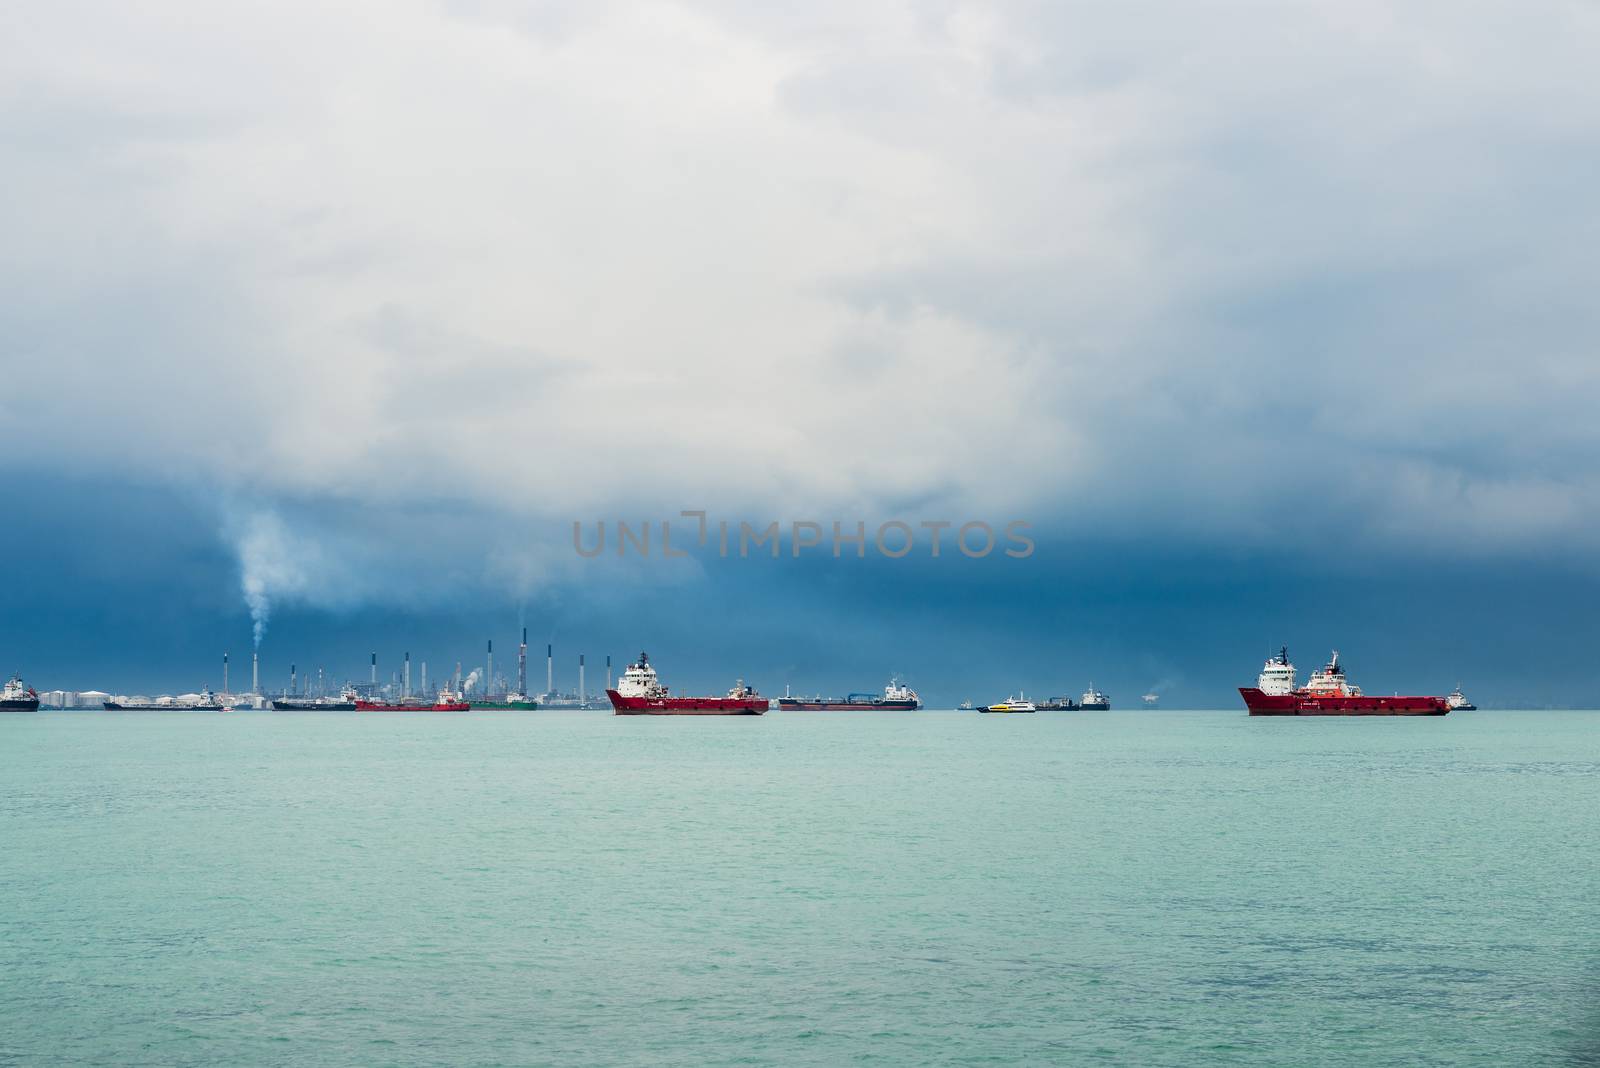 View of the Singapore Strait from Sentosa Island. Ships, industrial landscape and stormy weather.